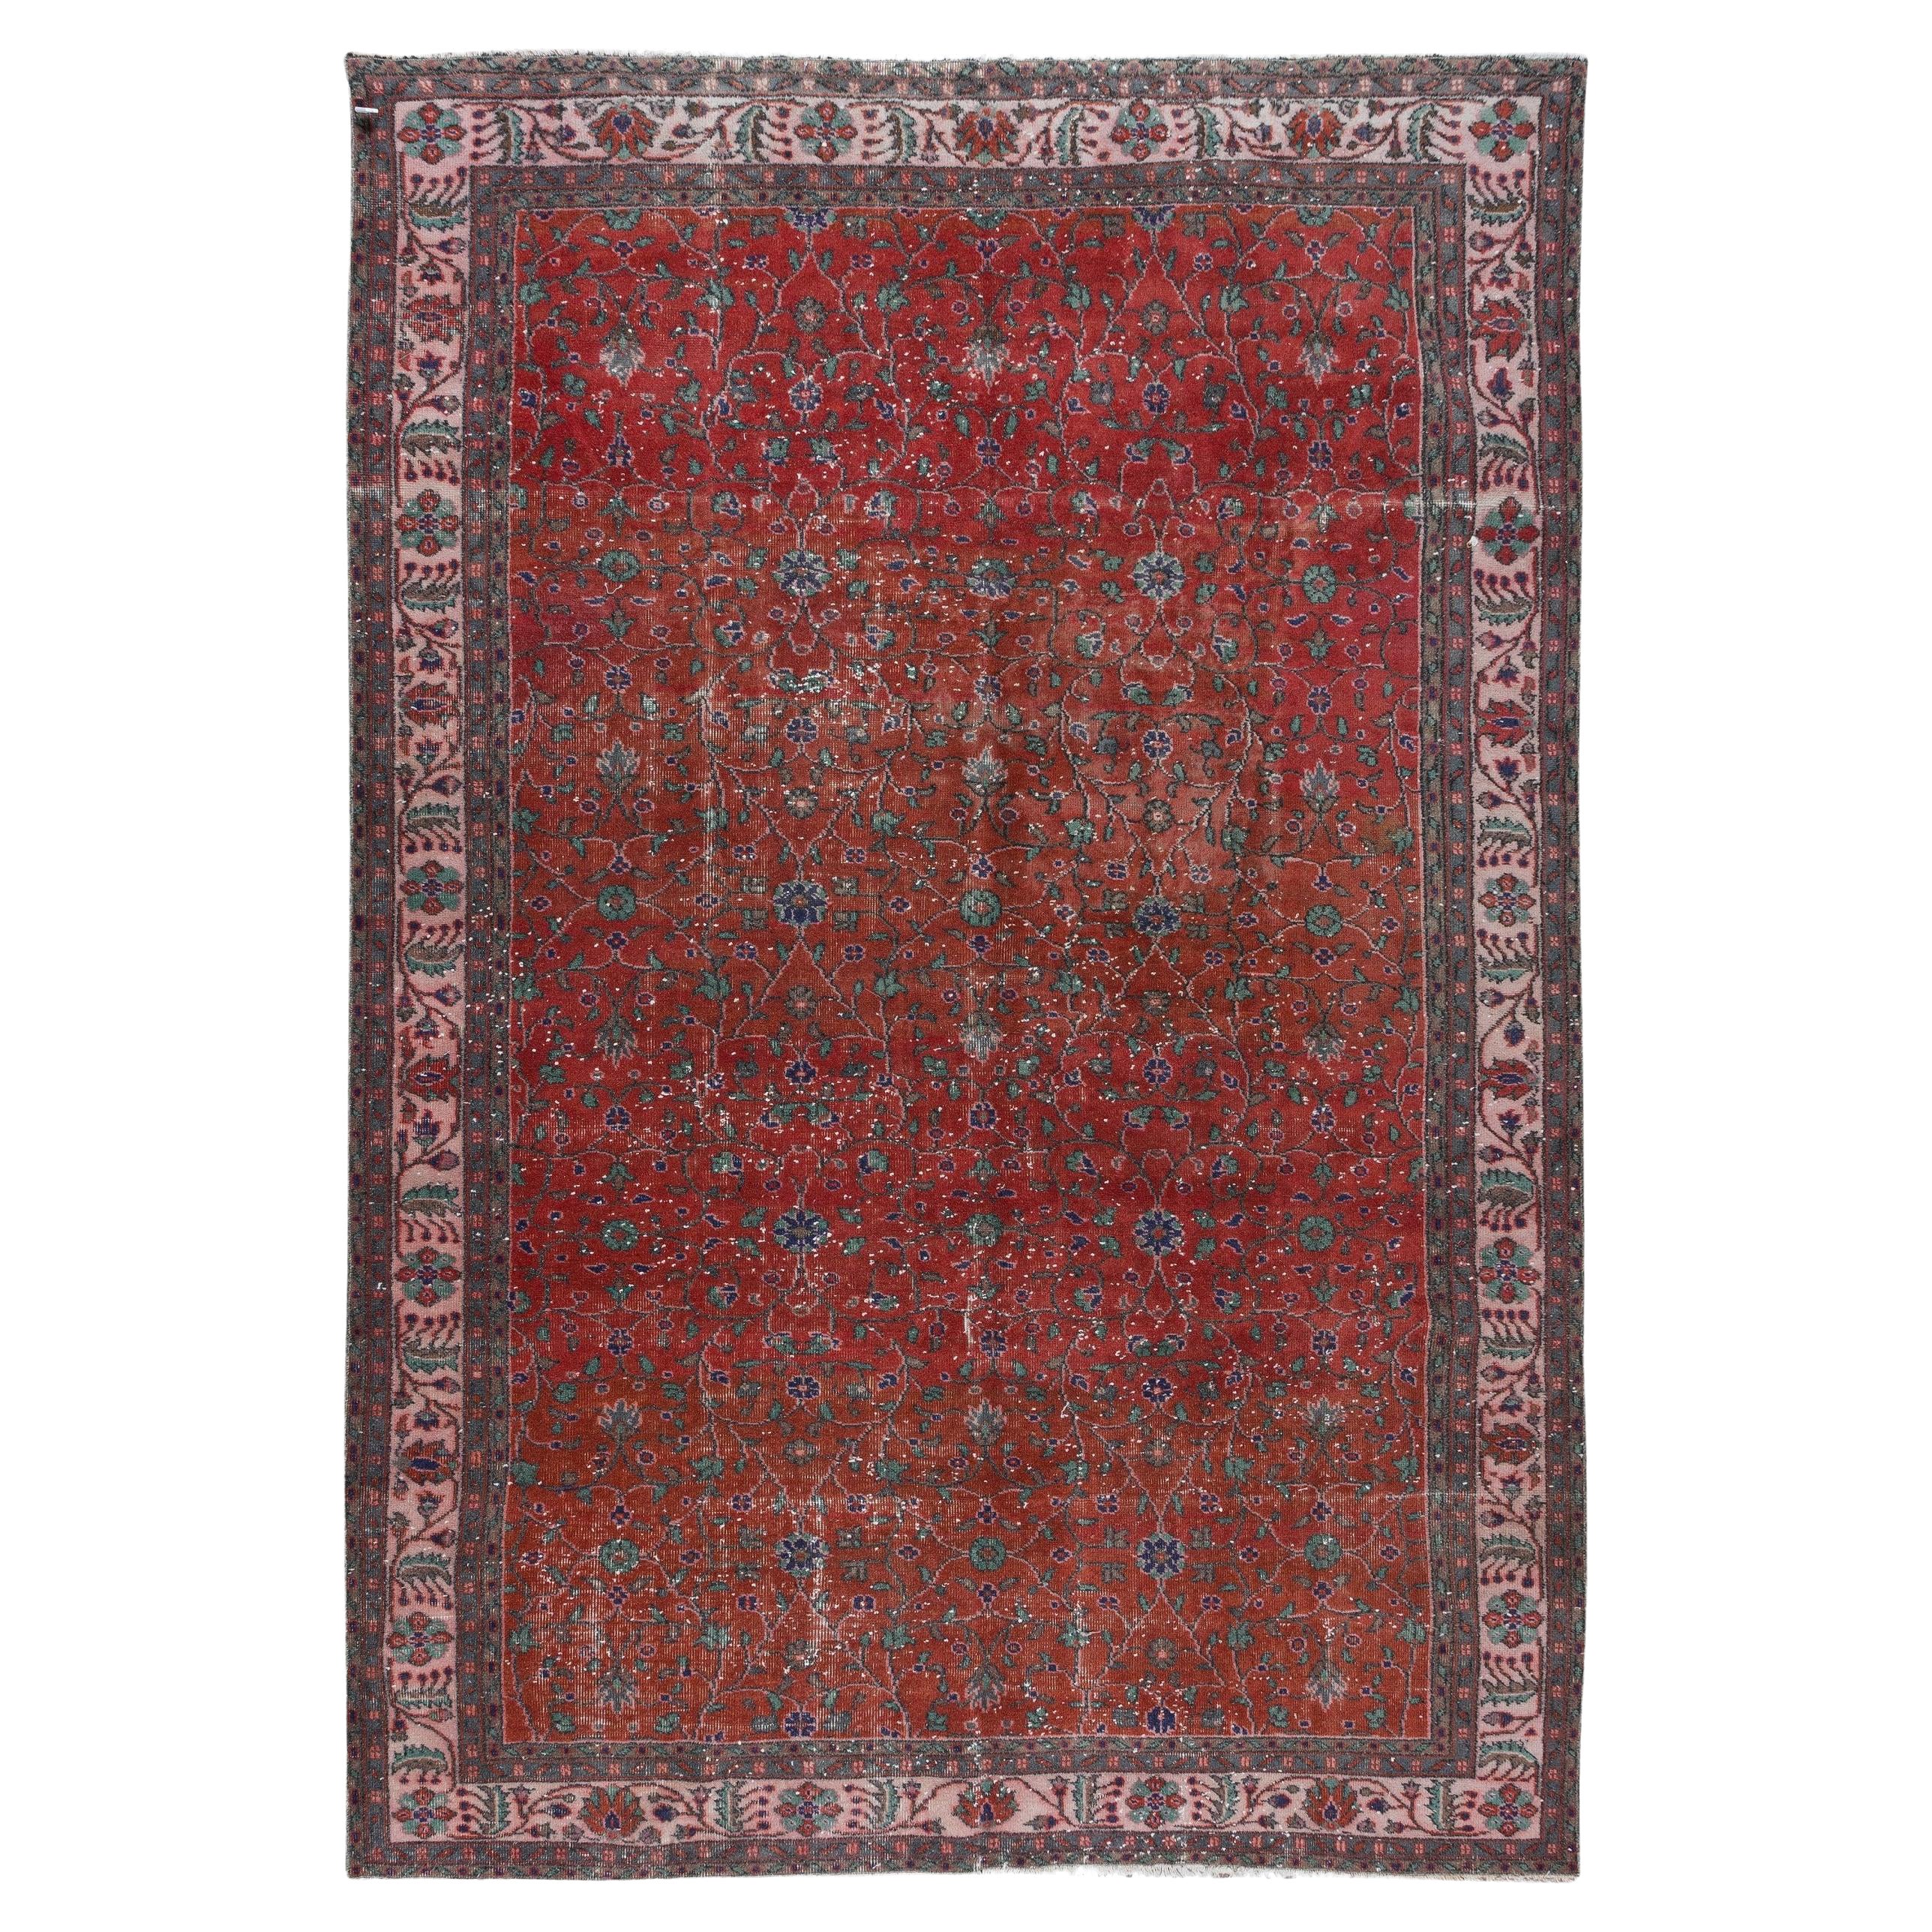 7x10.4 Ft Traditional Handmade Vintage Turkish Rug in Red, Beige, Blue and Green